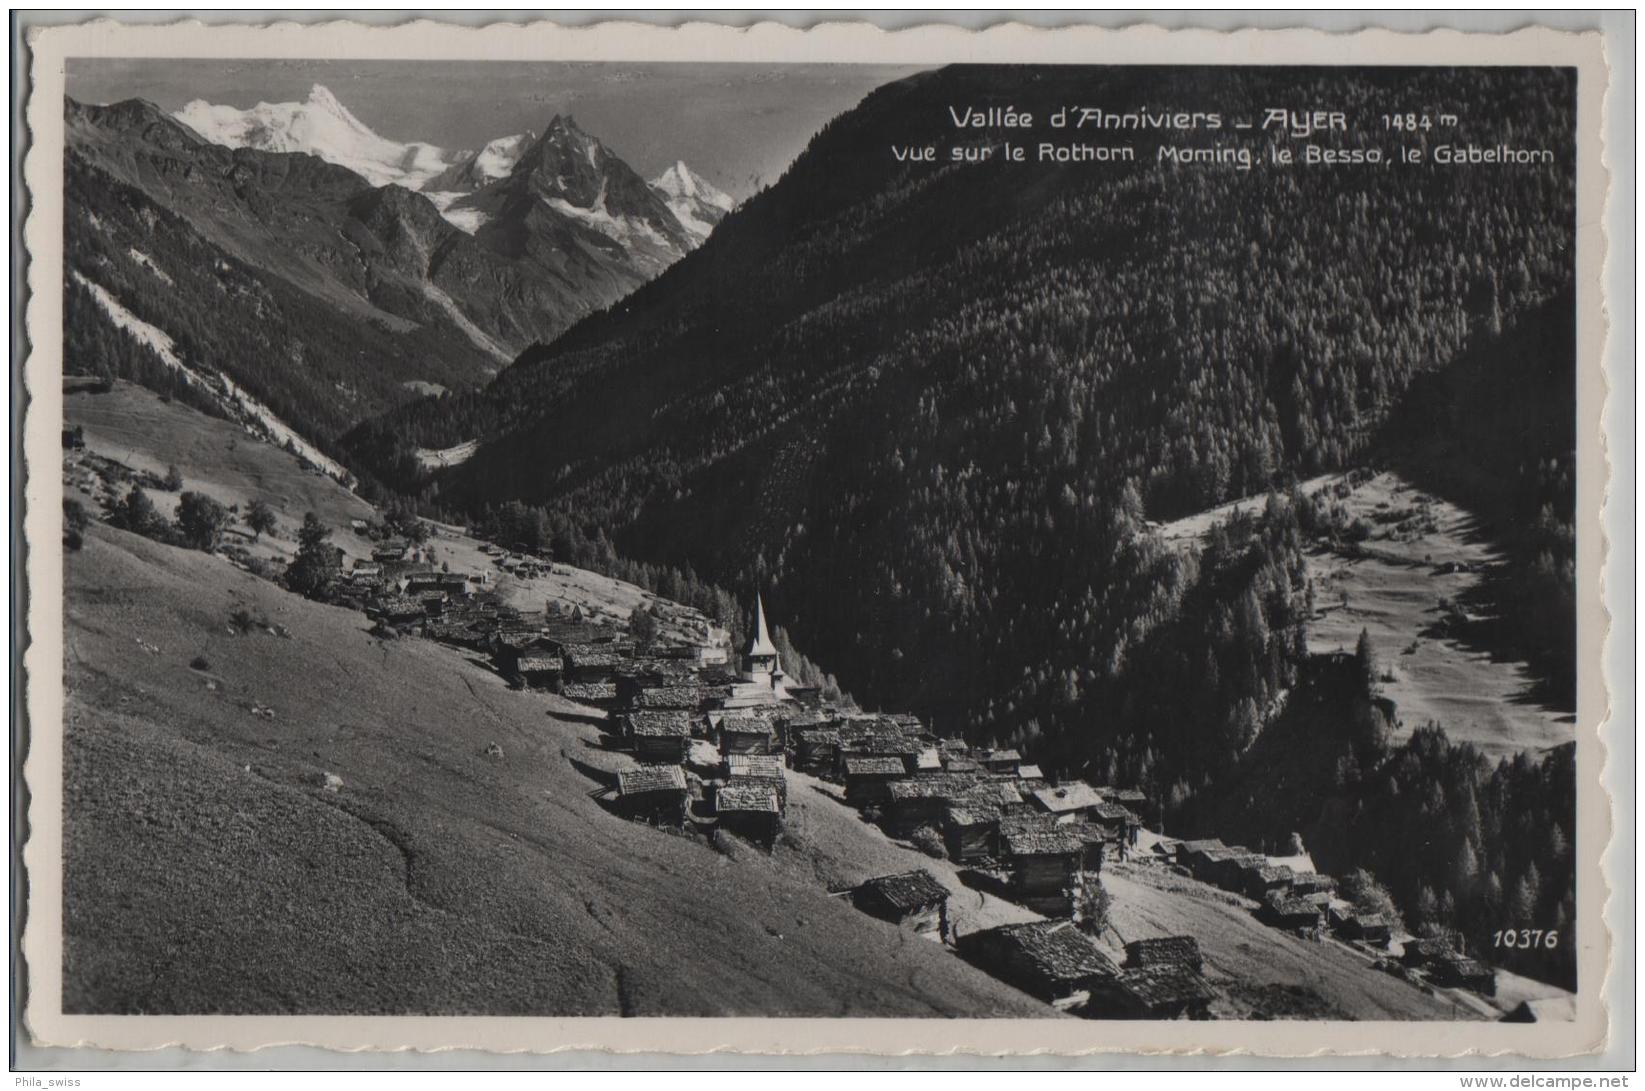 Vallee D'Anniviers - Ayer - Vue Sur Le Rothorn, Moming, Le Besso, Le Gabelhorn - Photo: Perrochet No. 10376 - Ayer